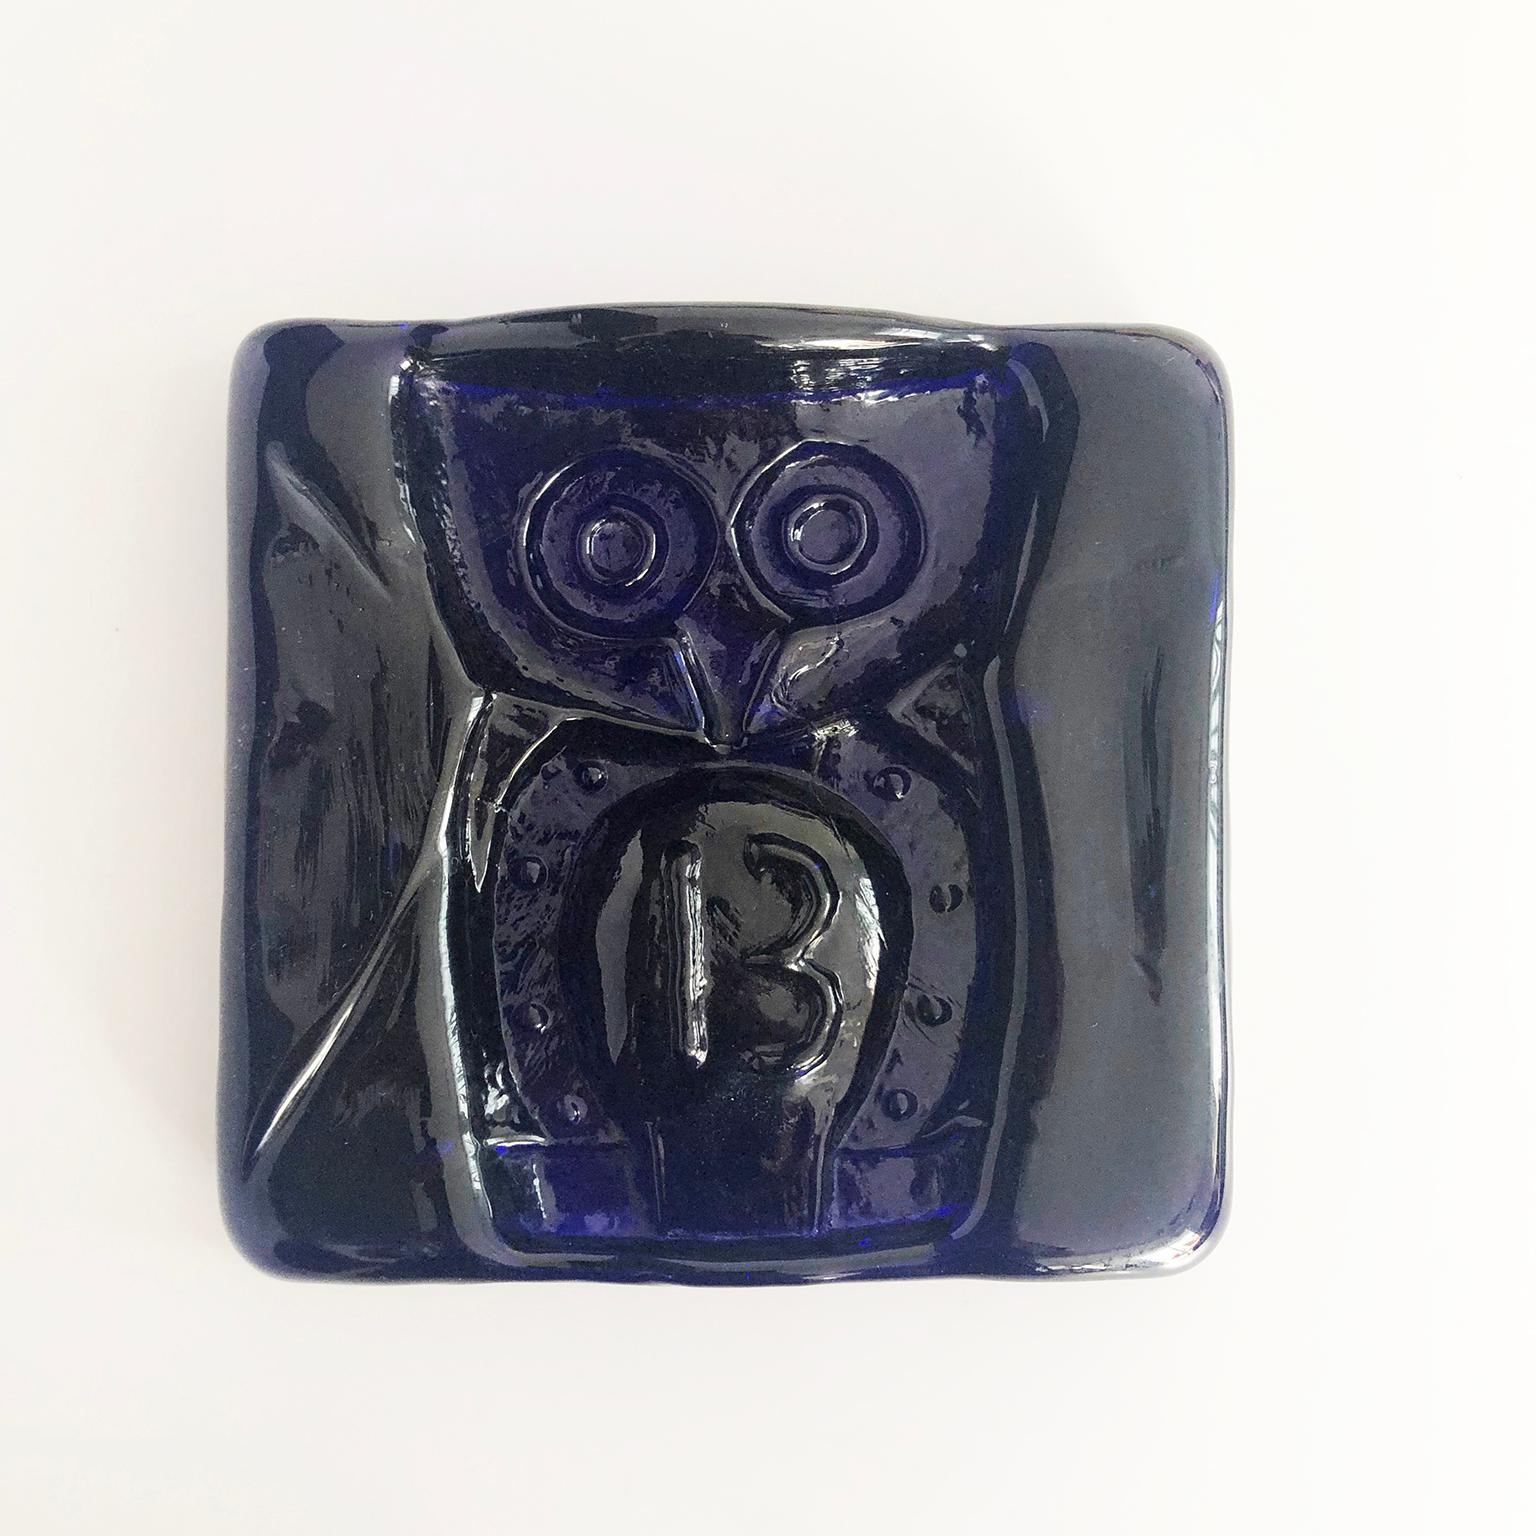 We offer this rare ashtray in hand blown glass by Feders, the ashtray have a figure of an owl inside and number 13, circa 1970.